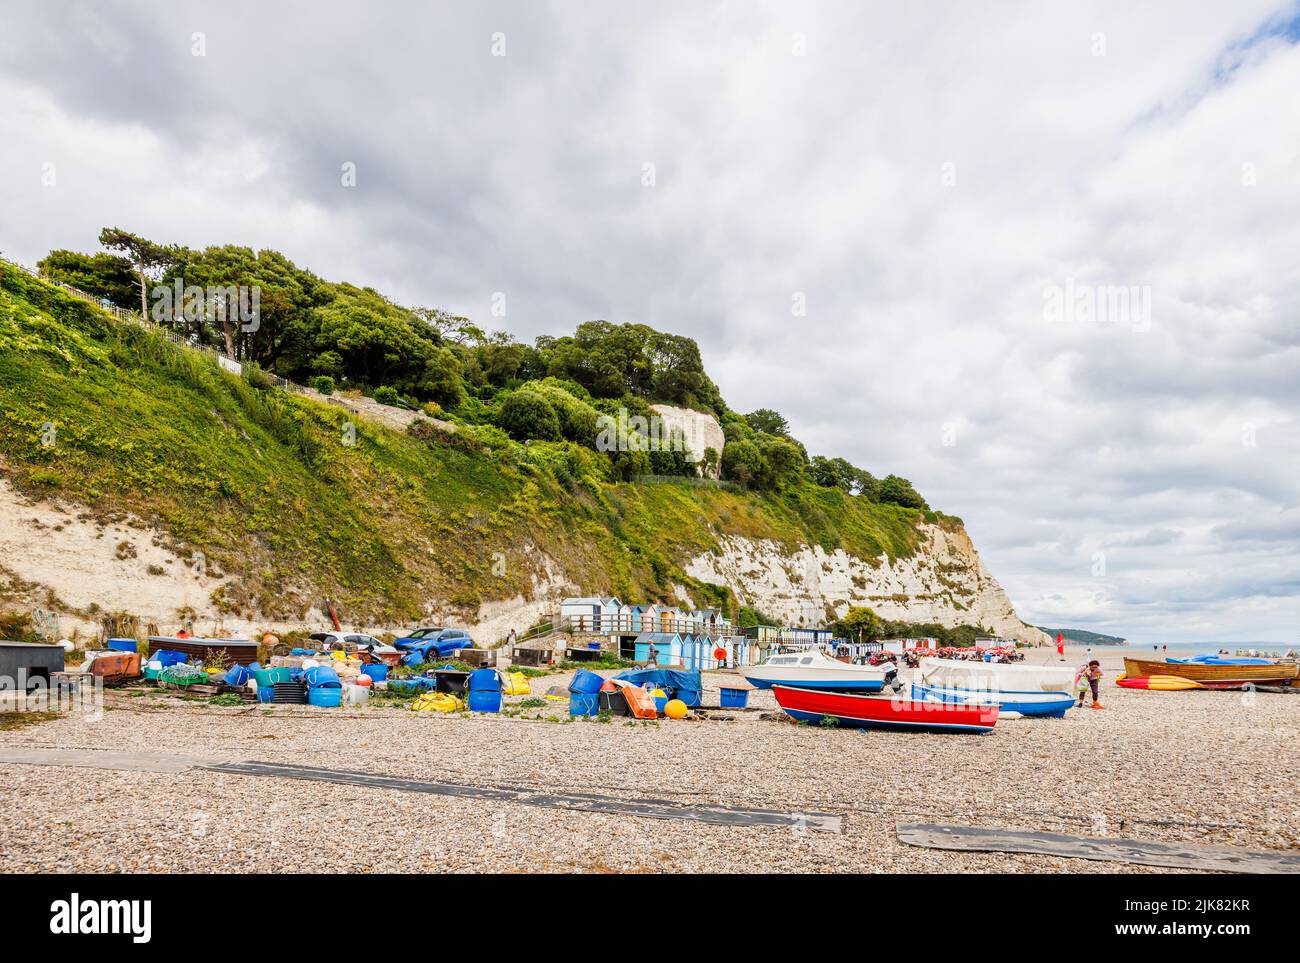 Beach and cliffs at Beer, a picturesque small coastal village on Lyme Bay in the Jurassic Coast of East Dorset, south-west England Stock Photo